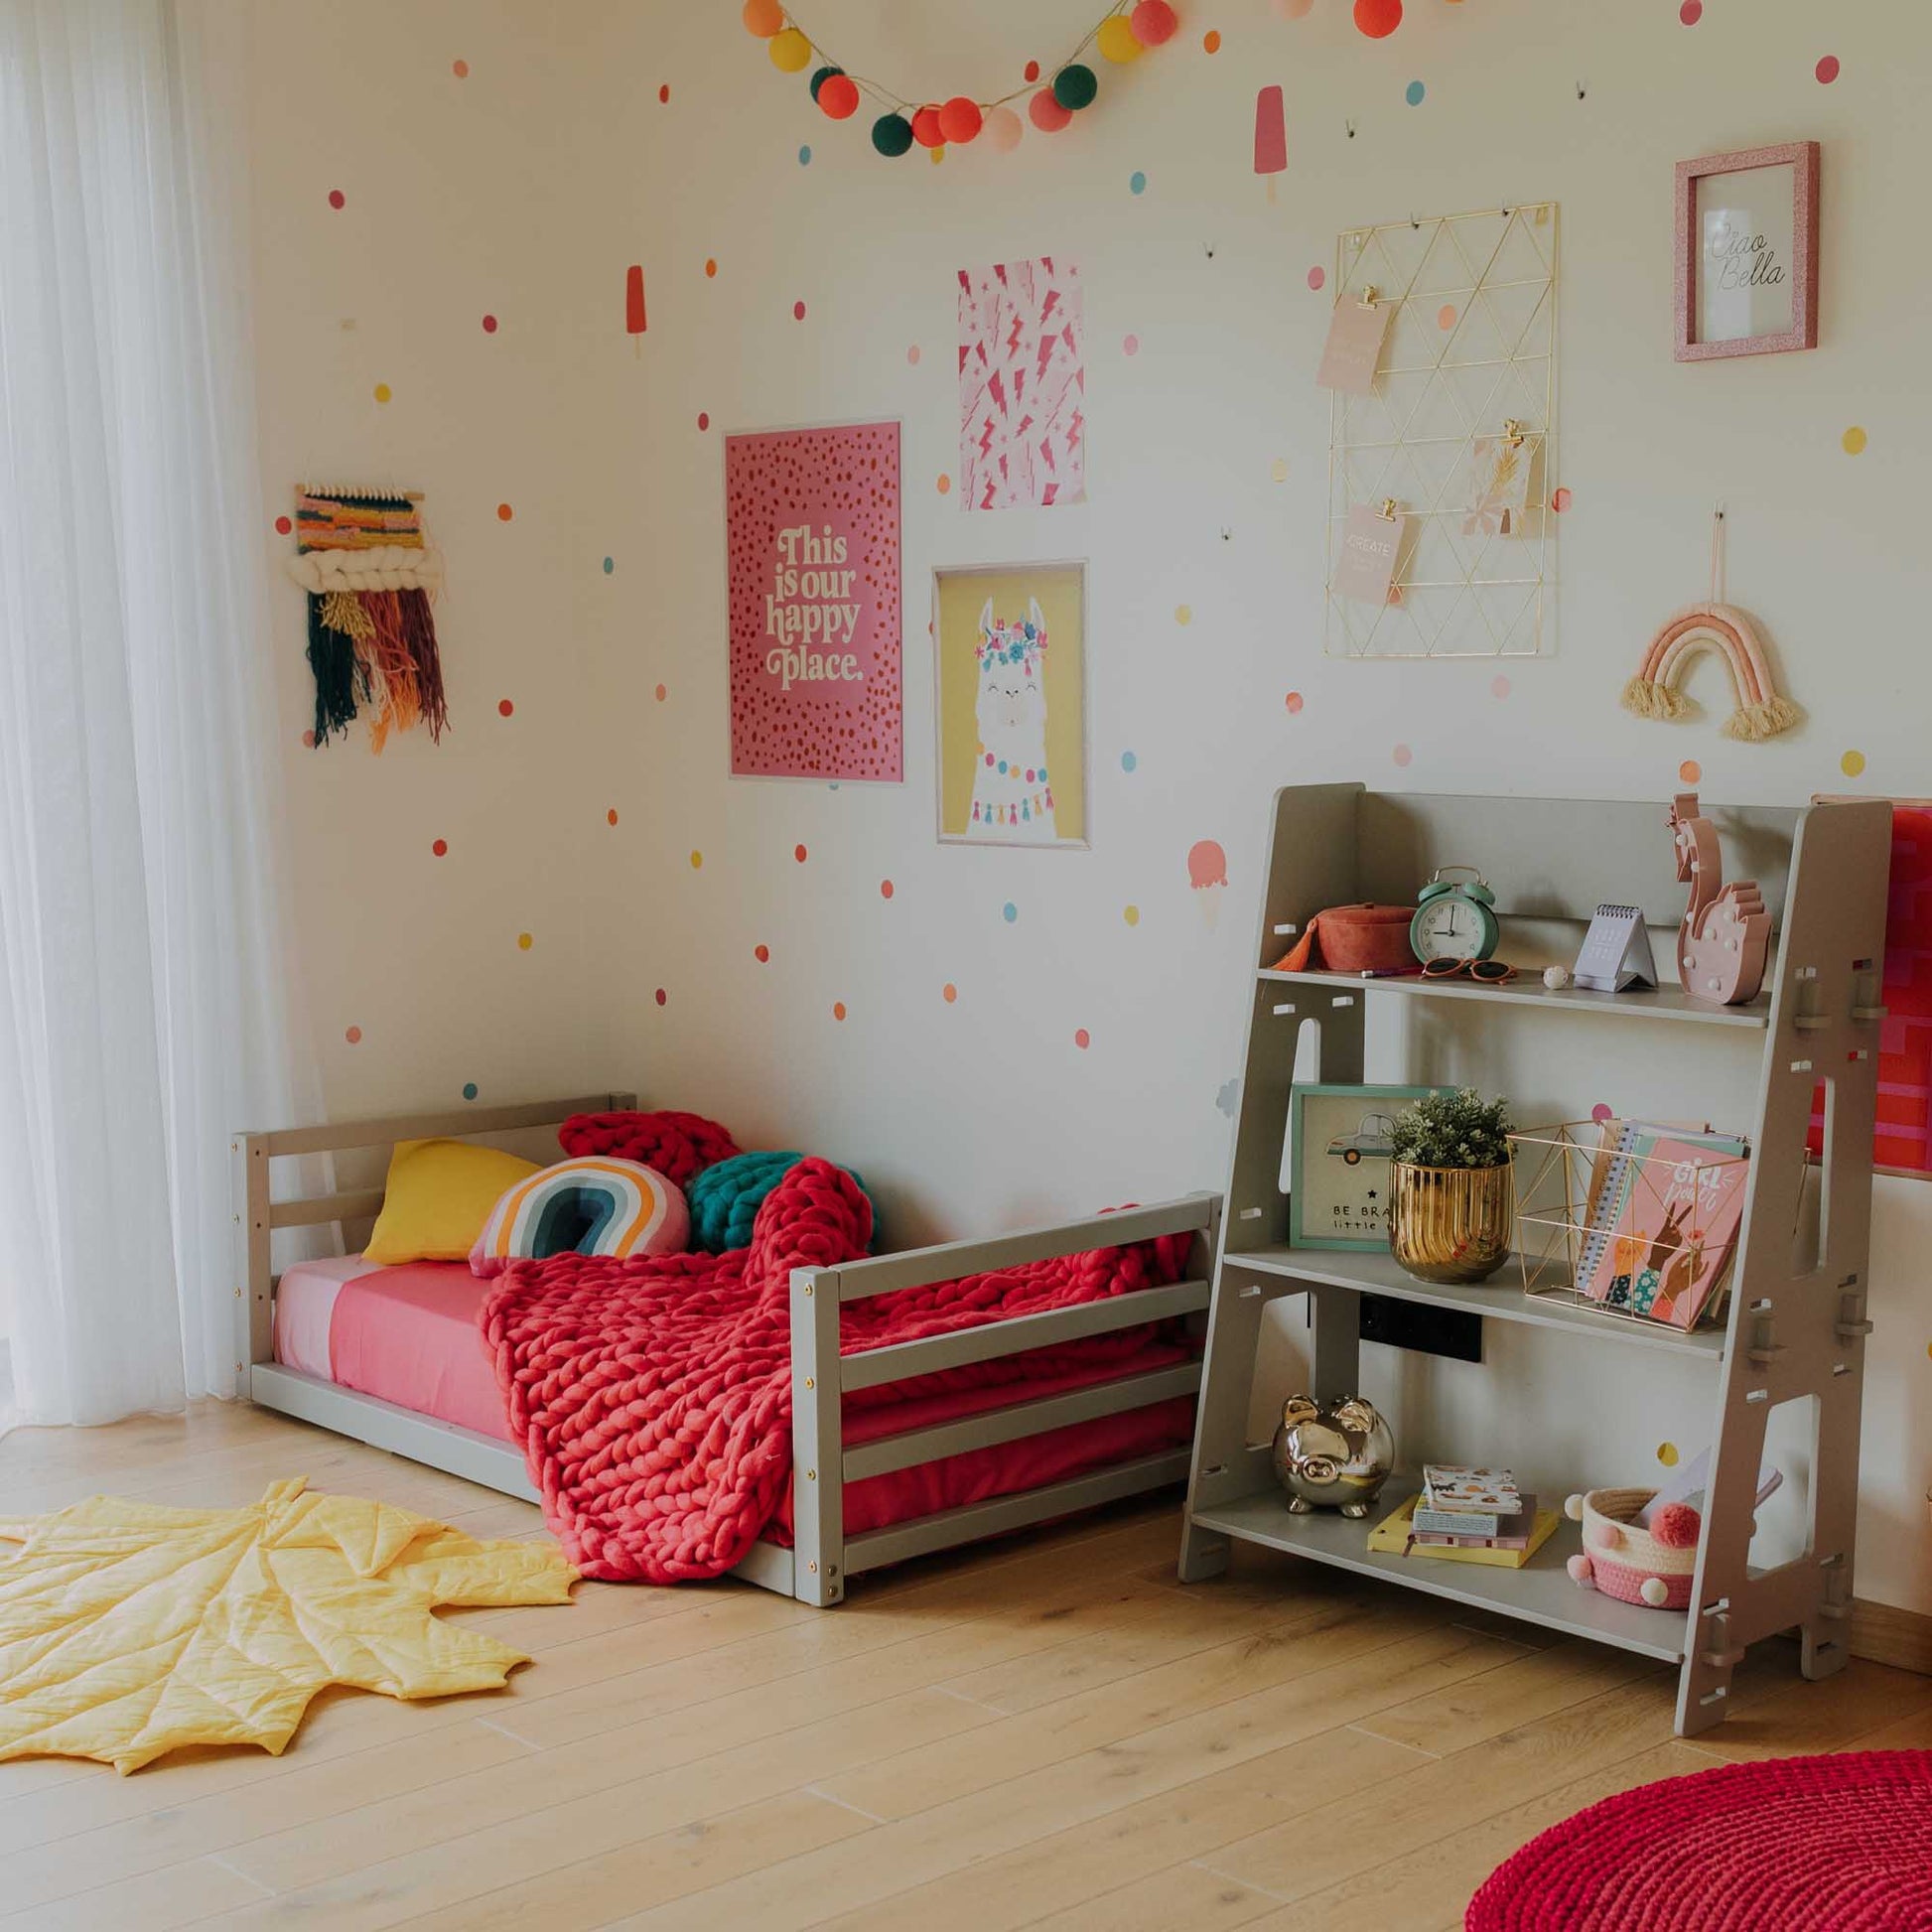 A colorful children's room with a vibrant polka dot theme and a cozy Sweet Home From Wood Toddler floor bed with a horizontal rail headboard and footboard.